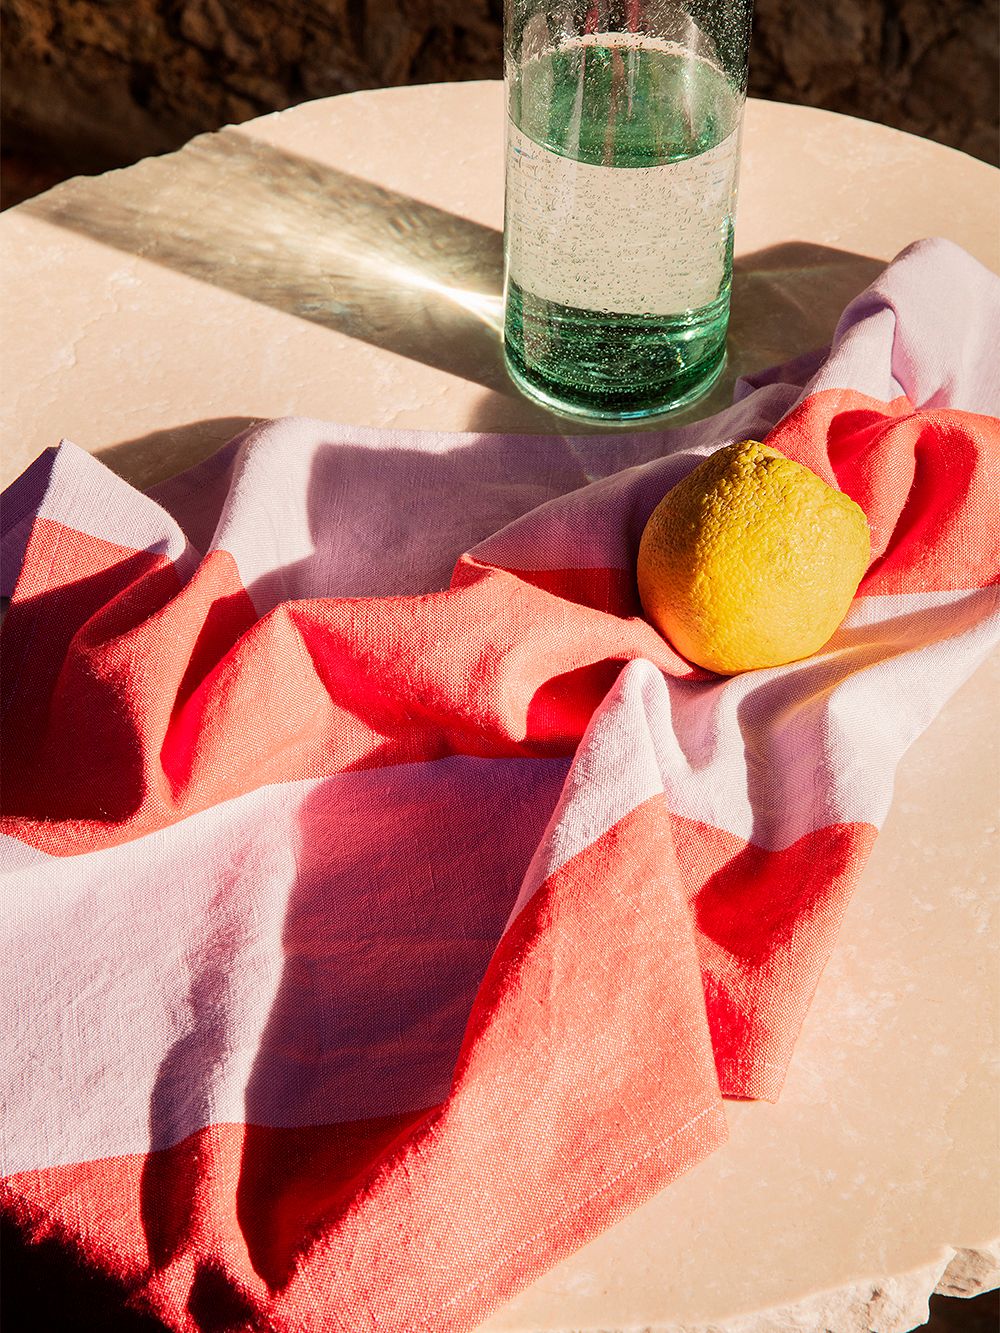 An image of ferm LIVING's Hale kitchen towel in red and lilac, on a table, as part of the kitchen decor.